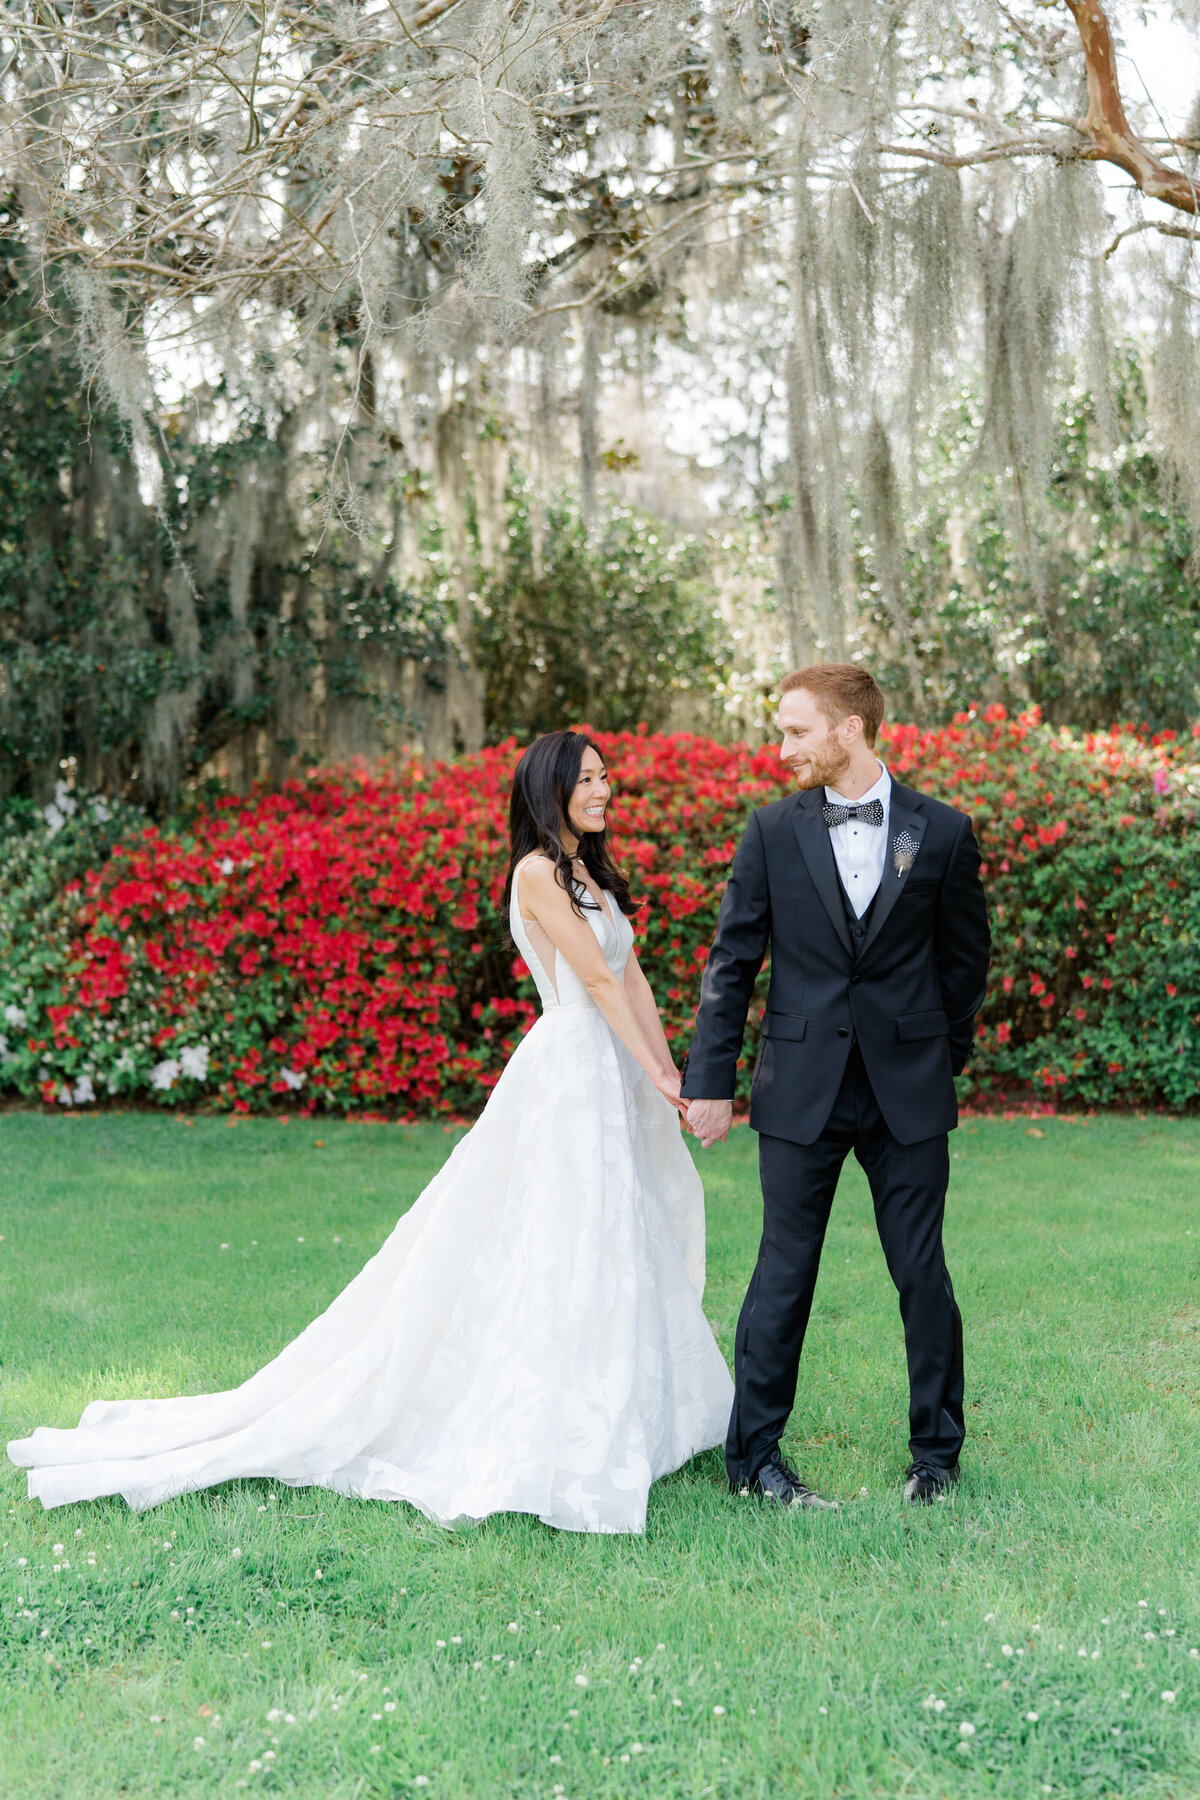 middleton_place_bride_groom_first_look_wedding_kailee_dimeglio_photography-180